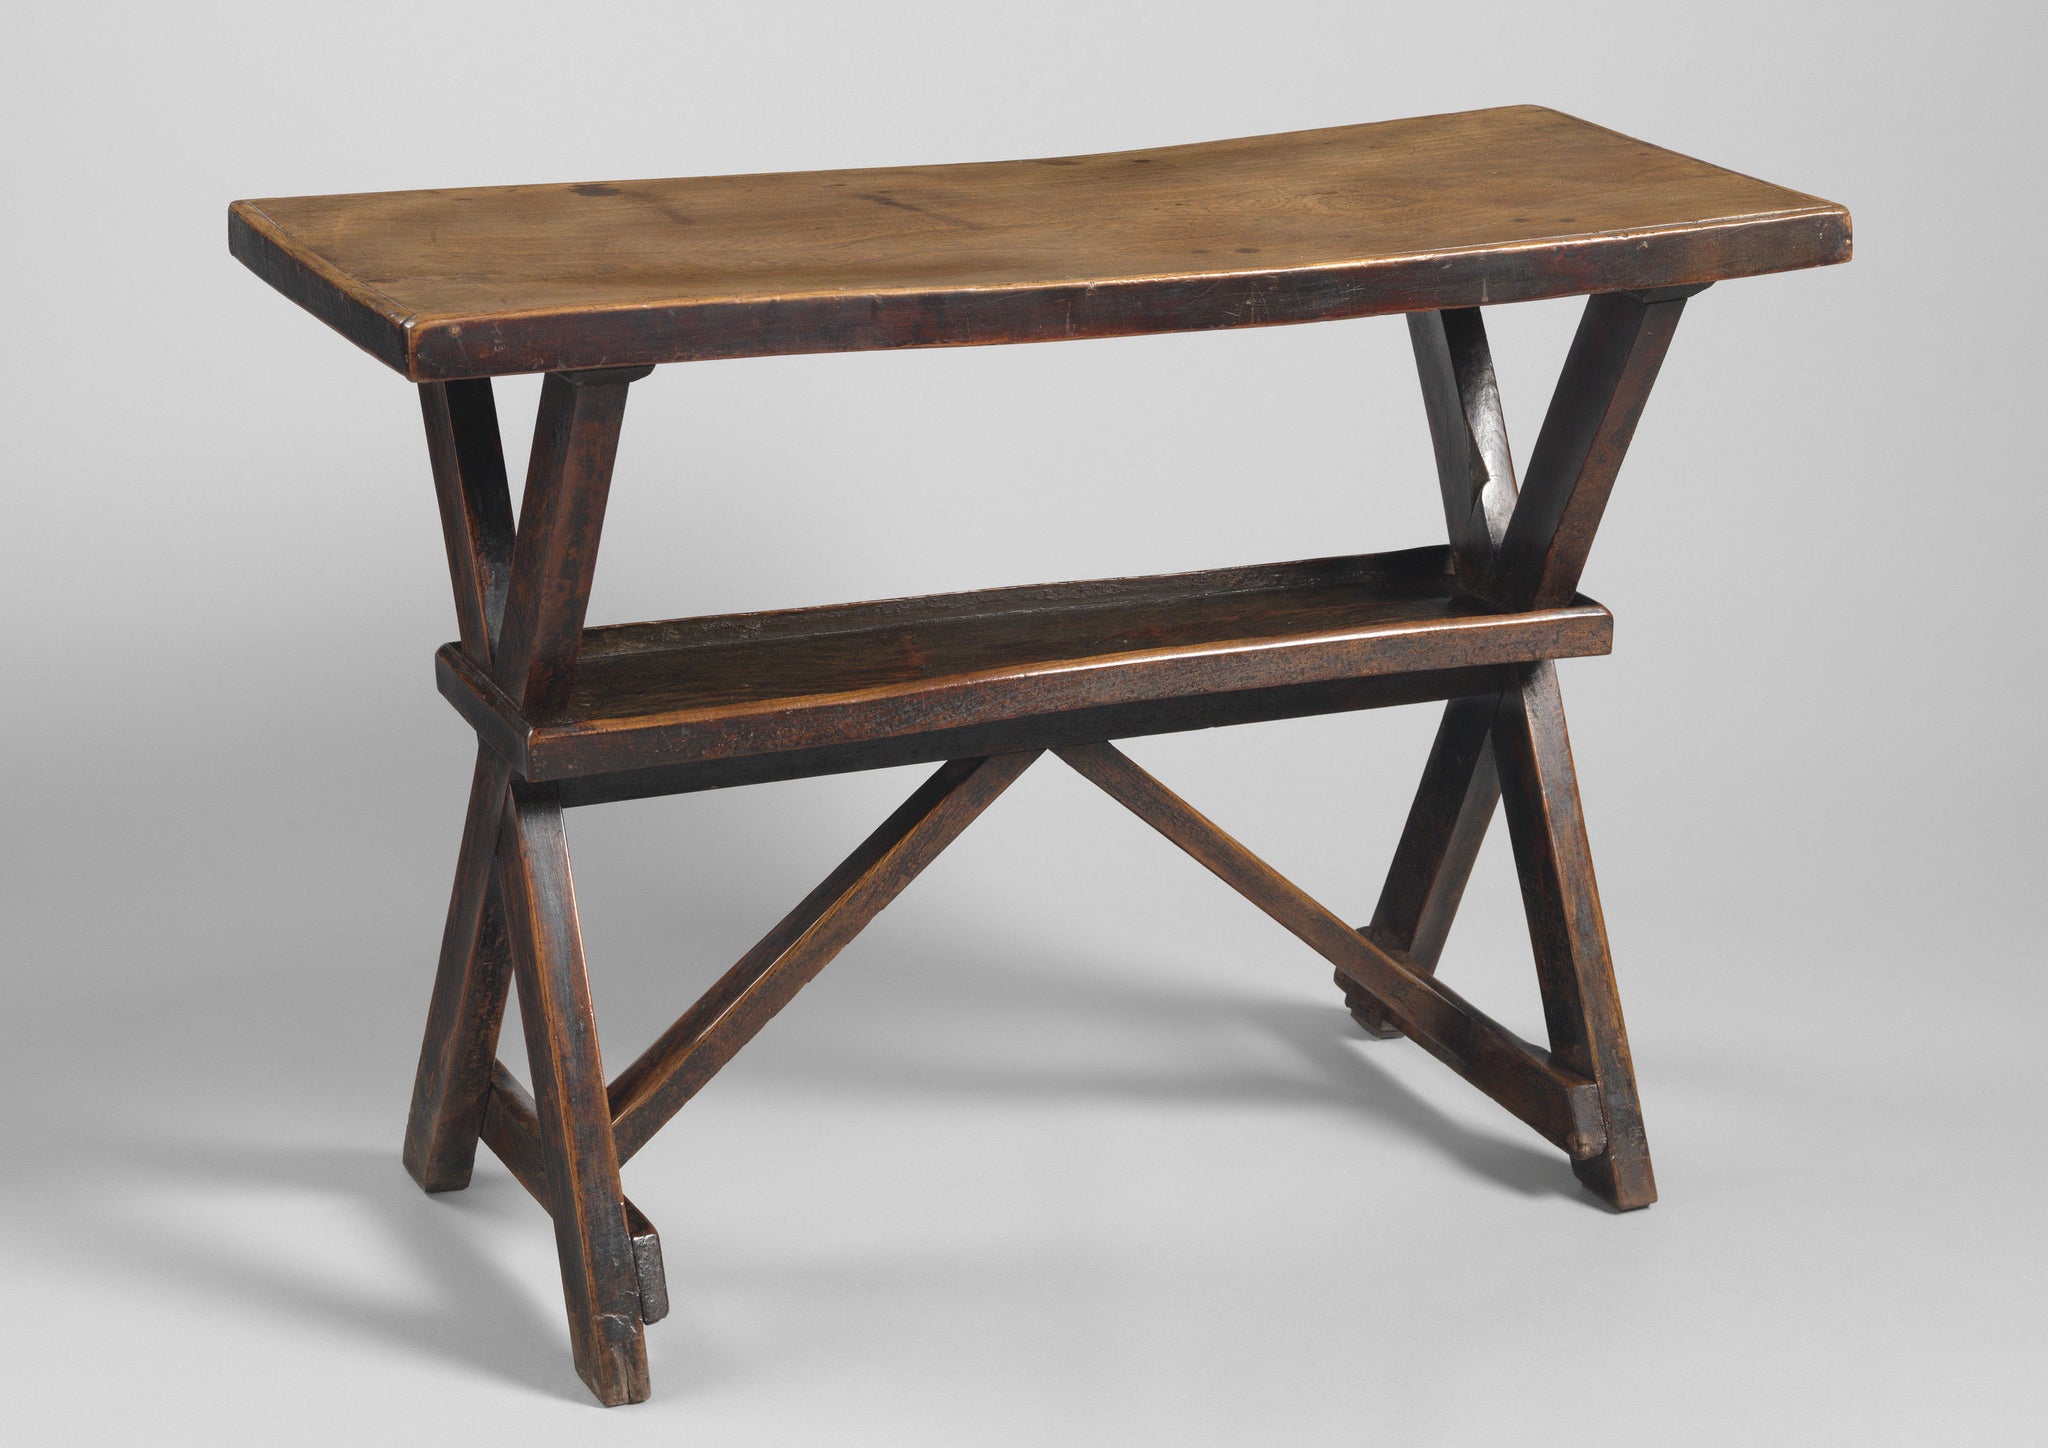 Two Sculptural Early Tavern Tables